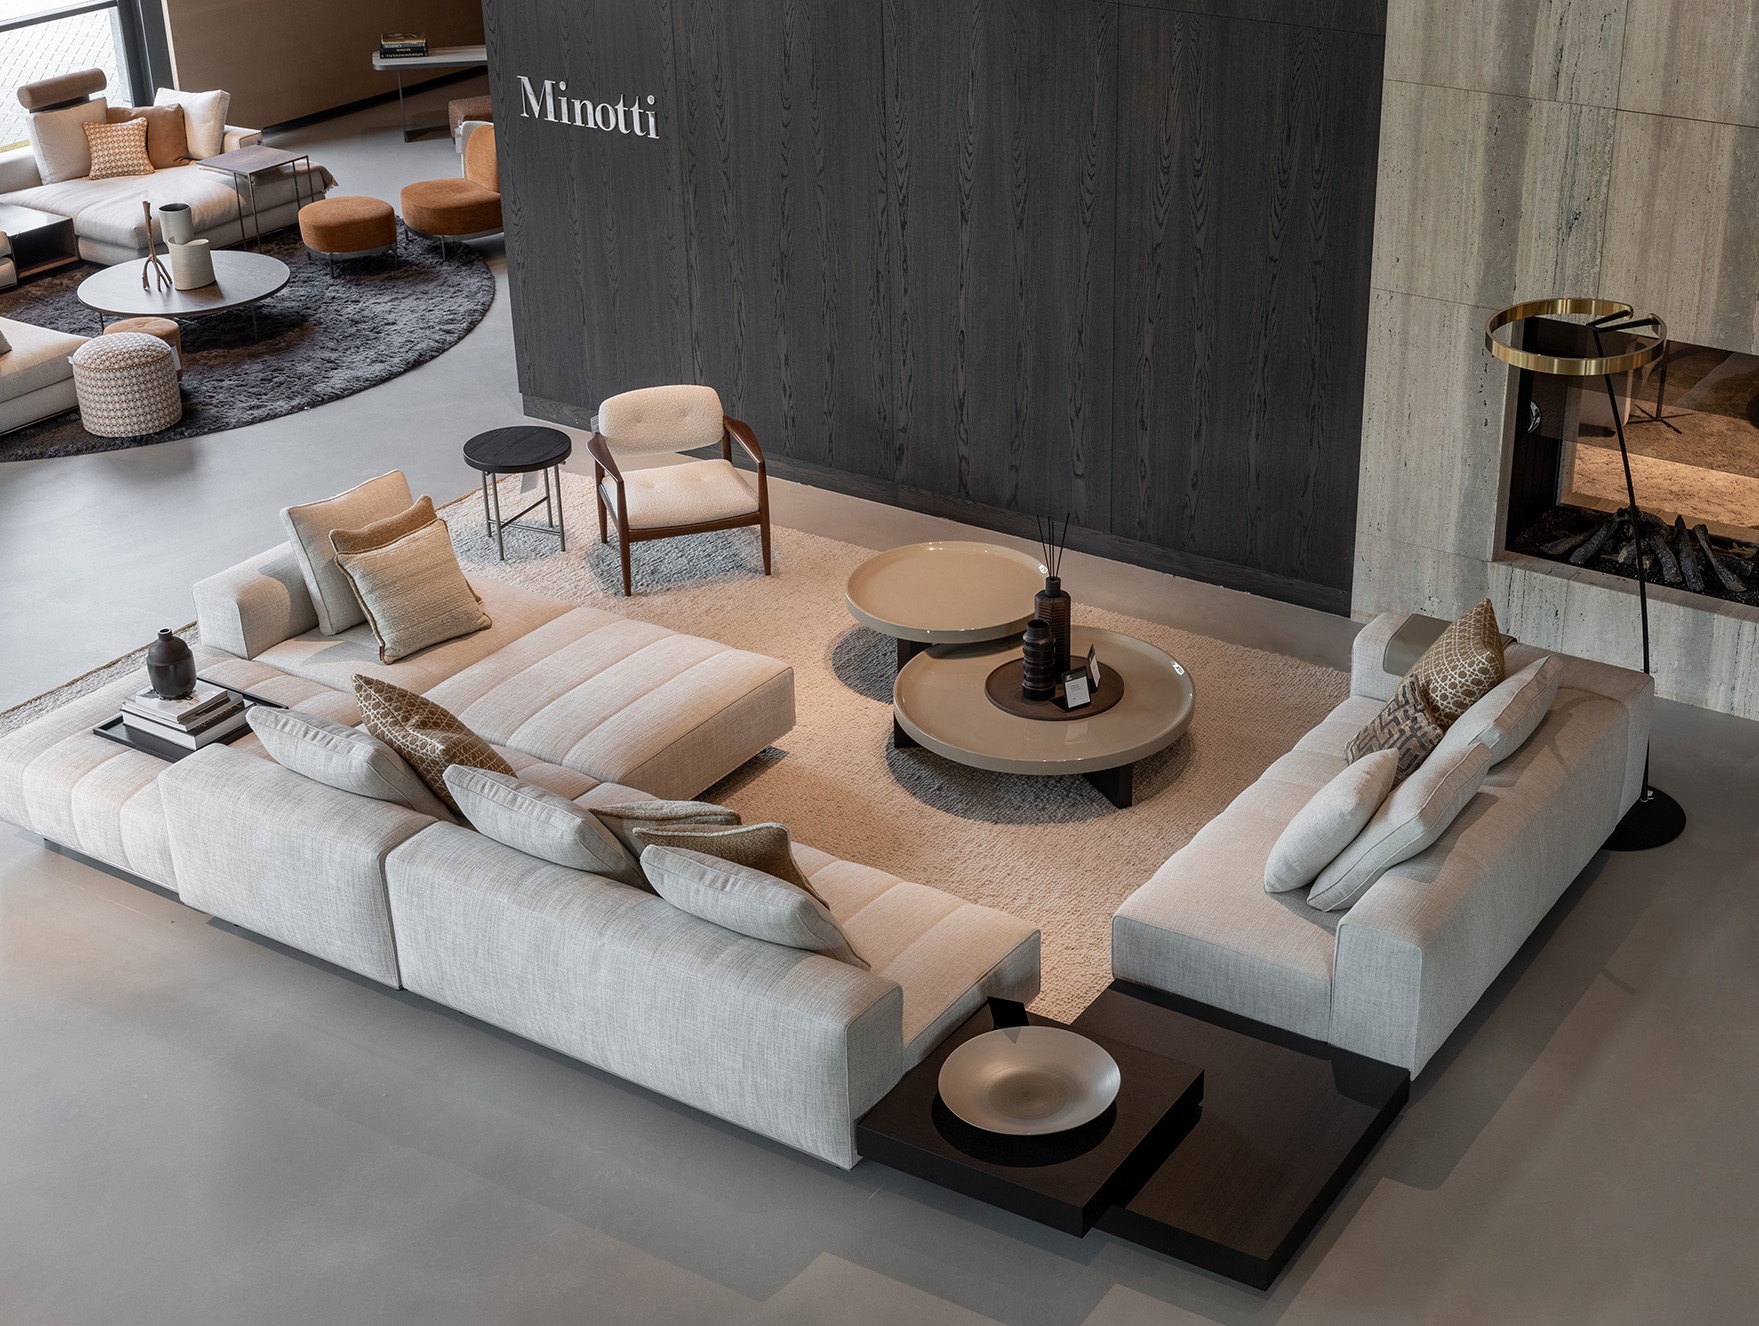 Minotti Goodman opstelling in Concept Store